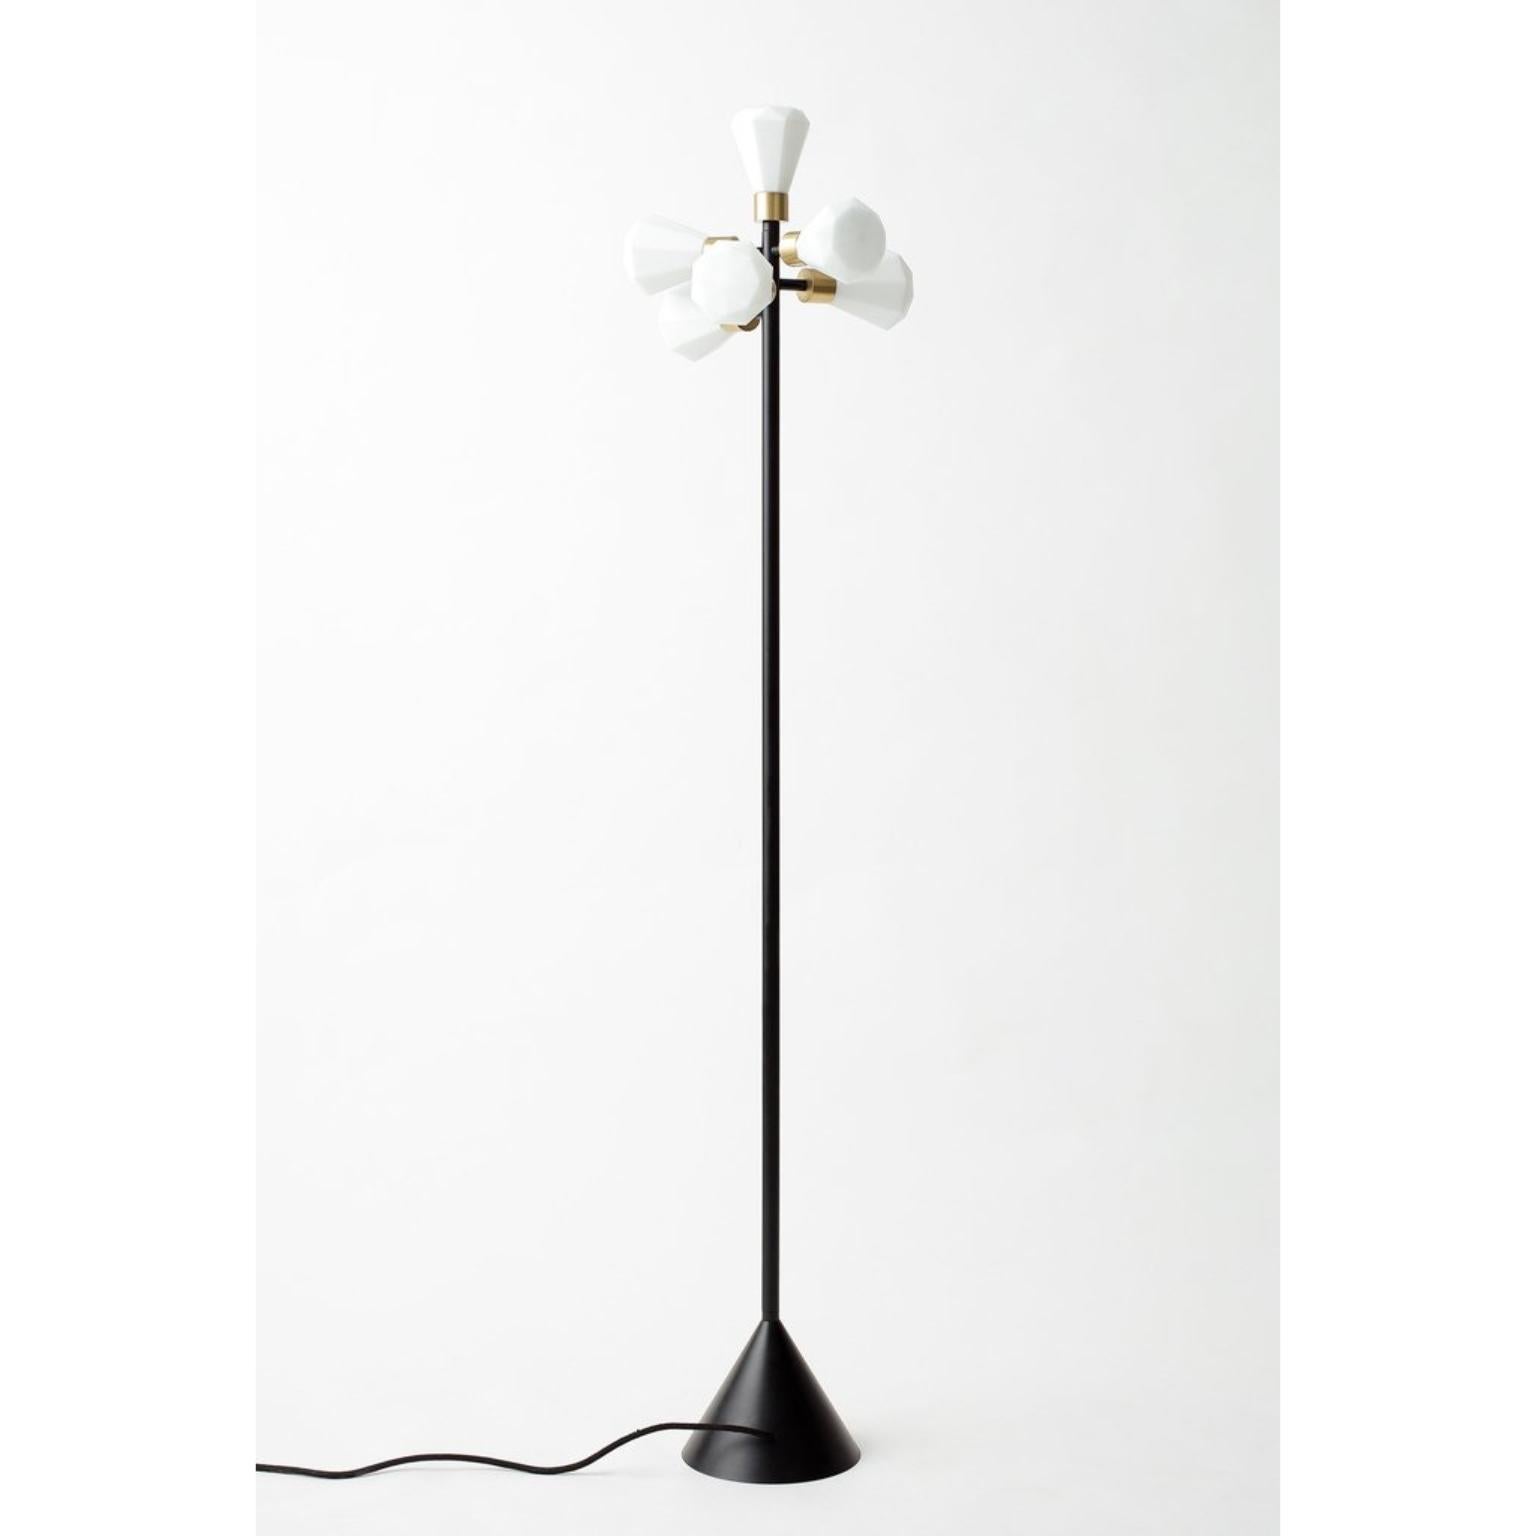 Unique cluster floor lamp by Hatsu
Dimensions: W 30 x H 148 cm 
Materials: Opal glass with powdercoated aluminium, brass details

Hatsu is a design studio based in Mumbai that creates modern lighting that are unique and immediately recognisable.